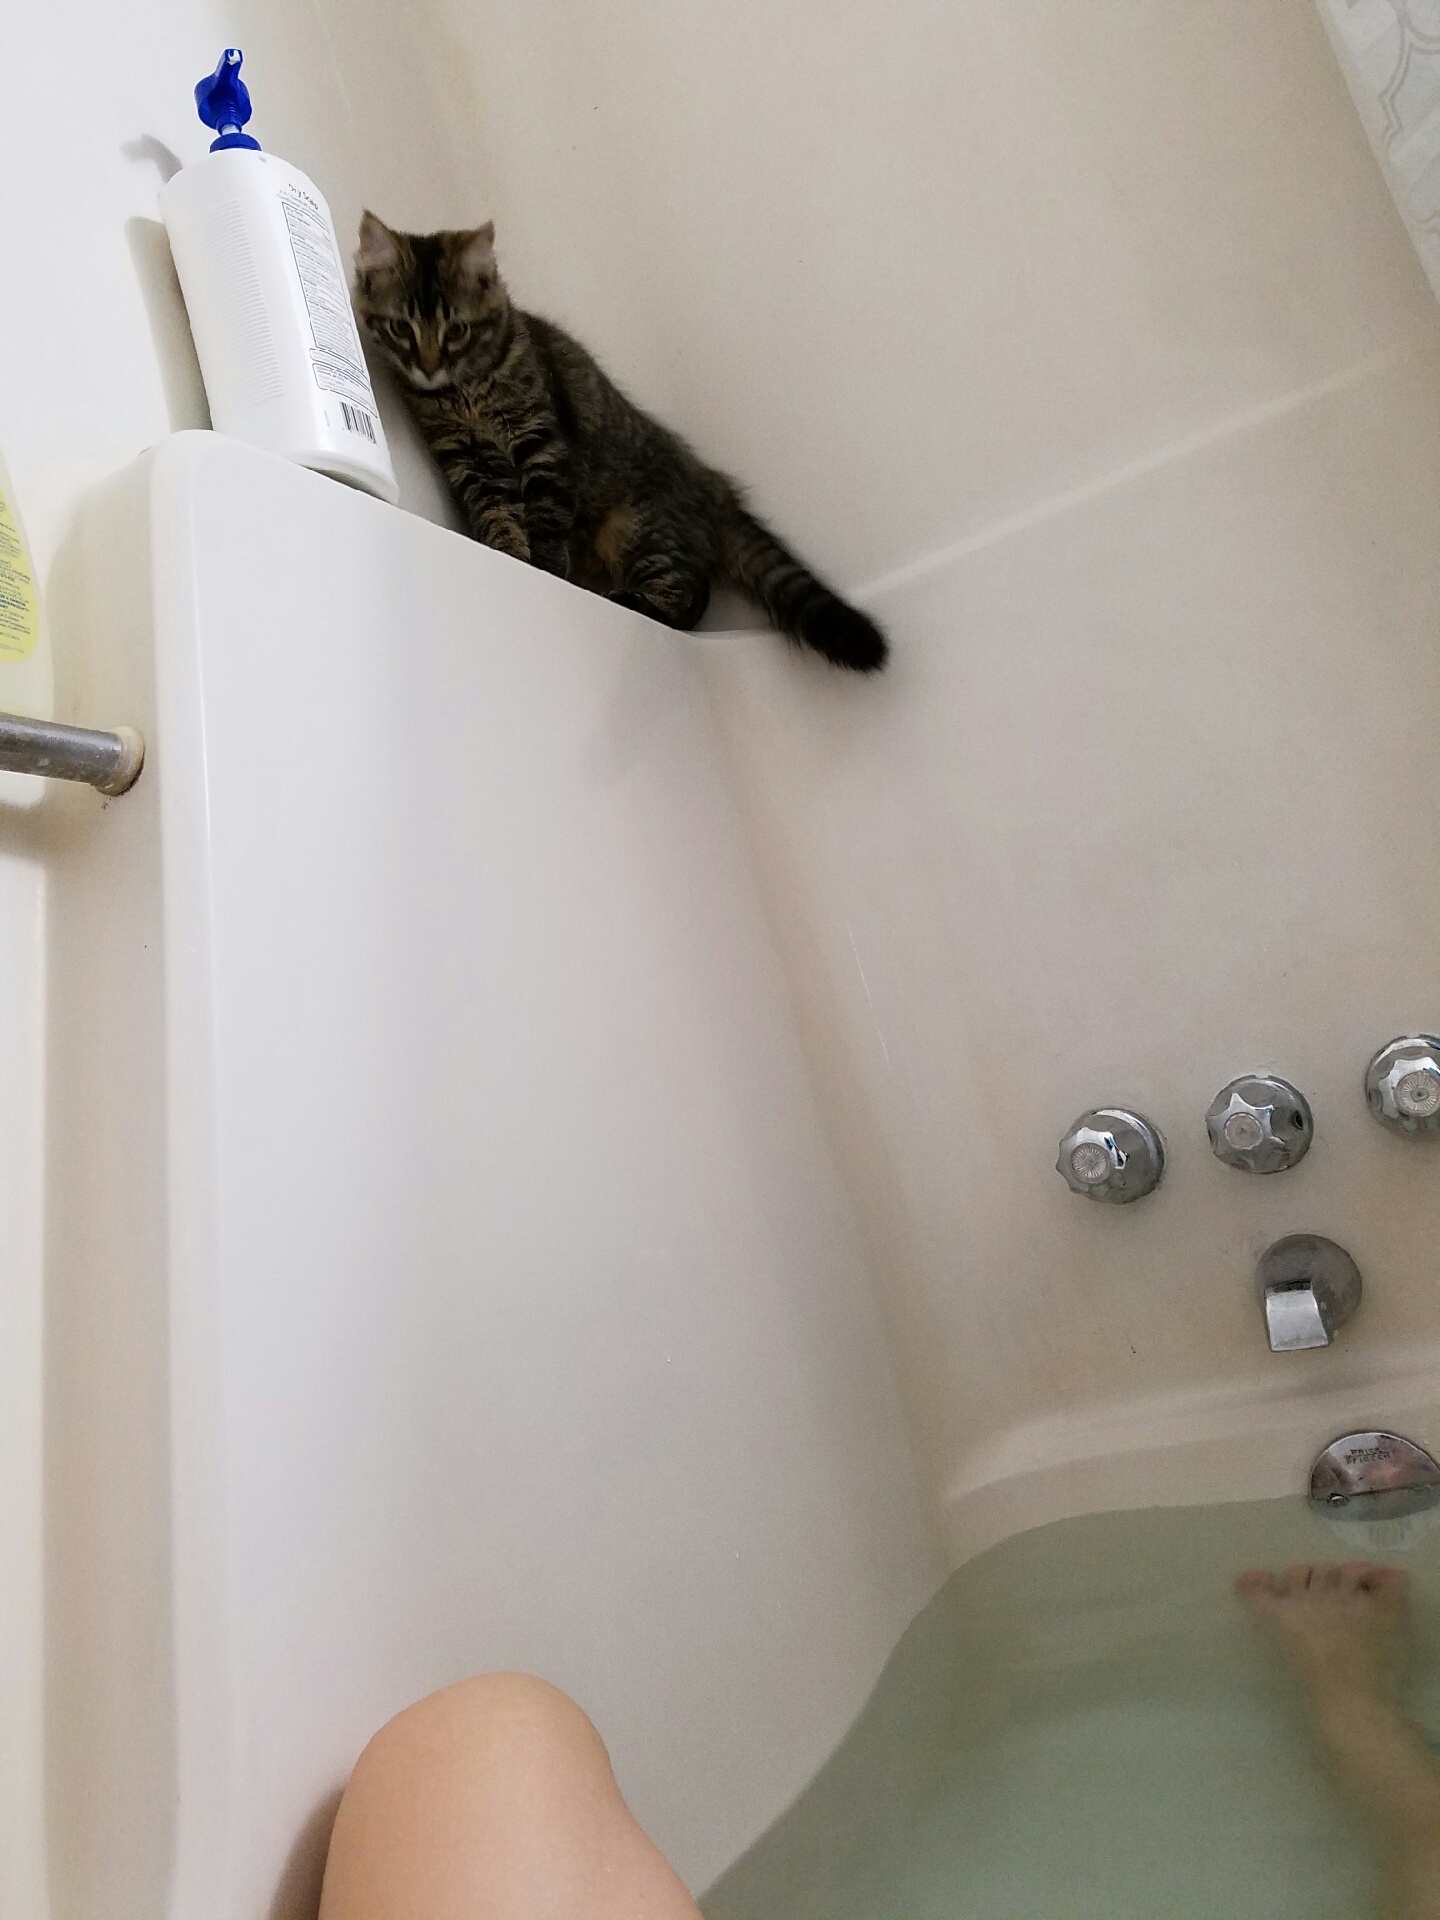 Same kitten, now perched on a shelf overlooking the bathtub